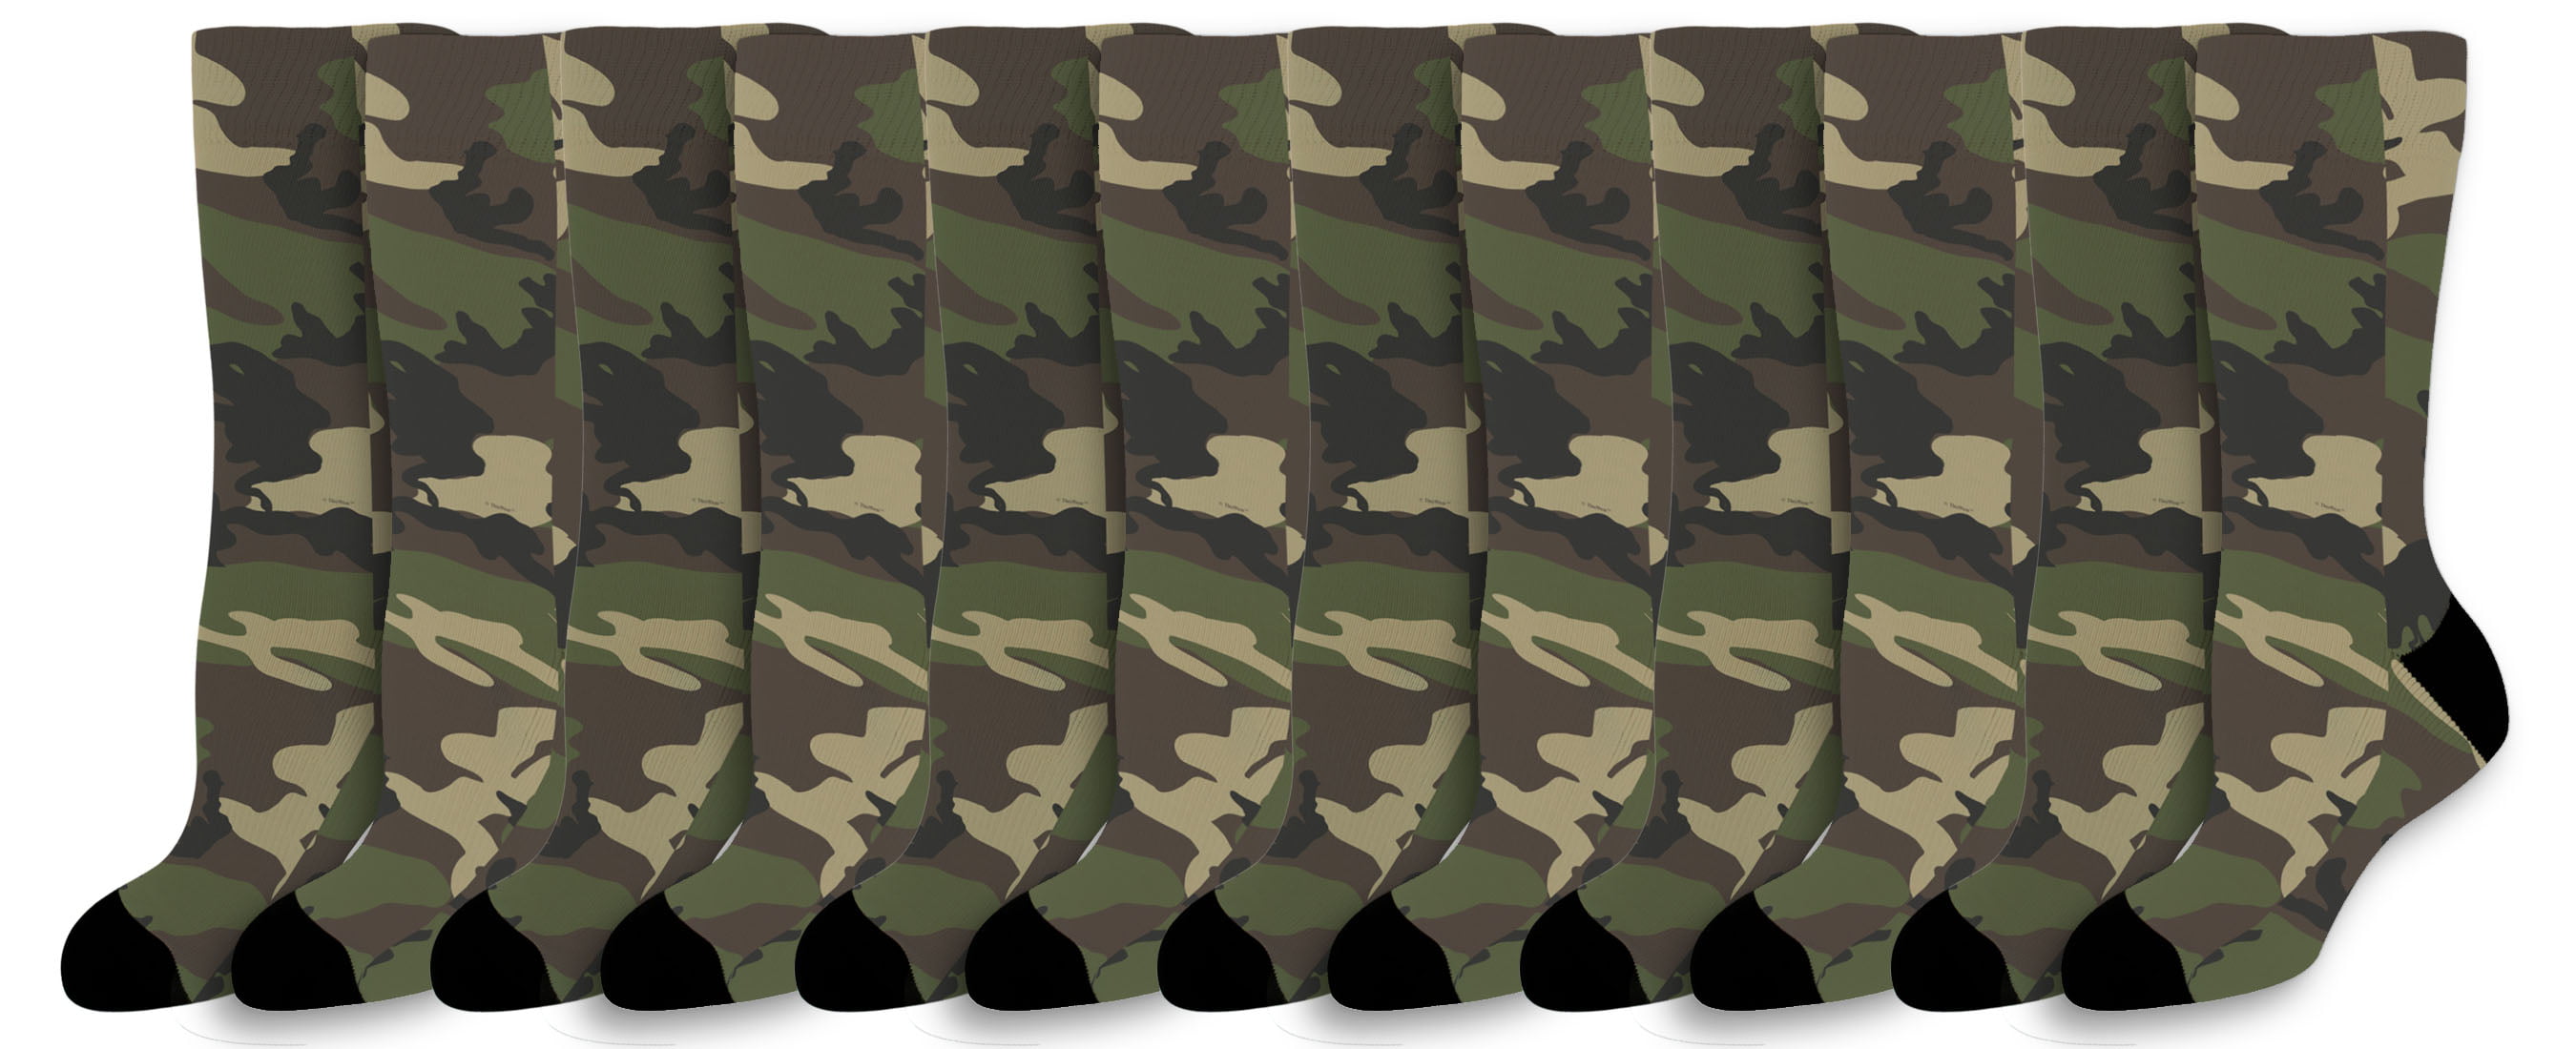 New 12 Pairs Mens Womens Ankle Socks Cotton Stretch Camo Woodland Military Army 